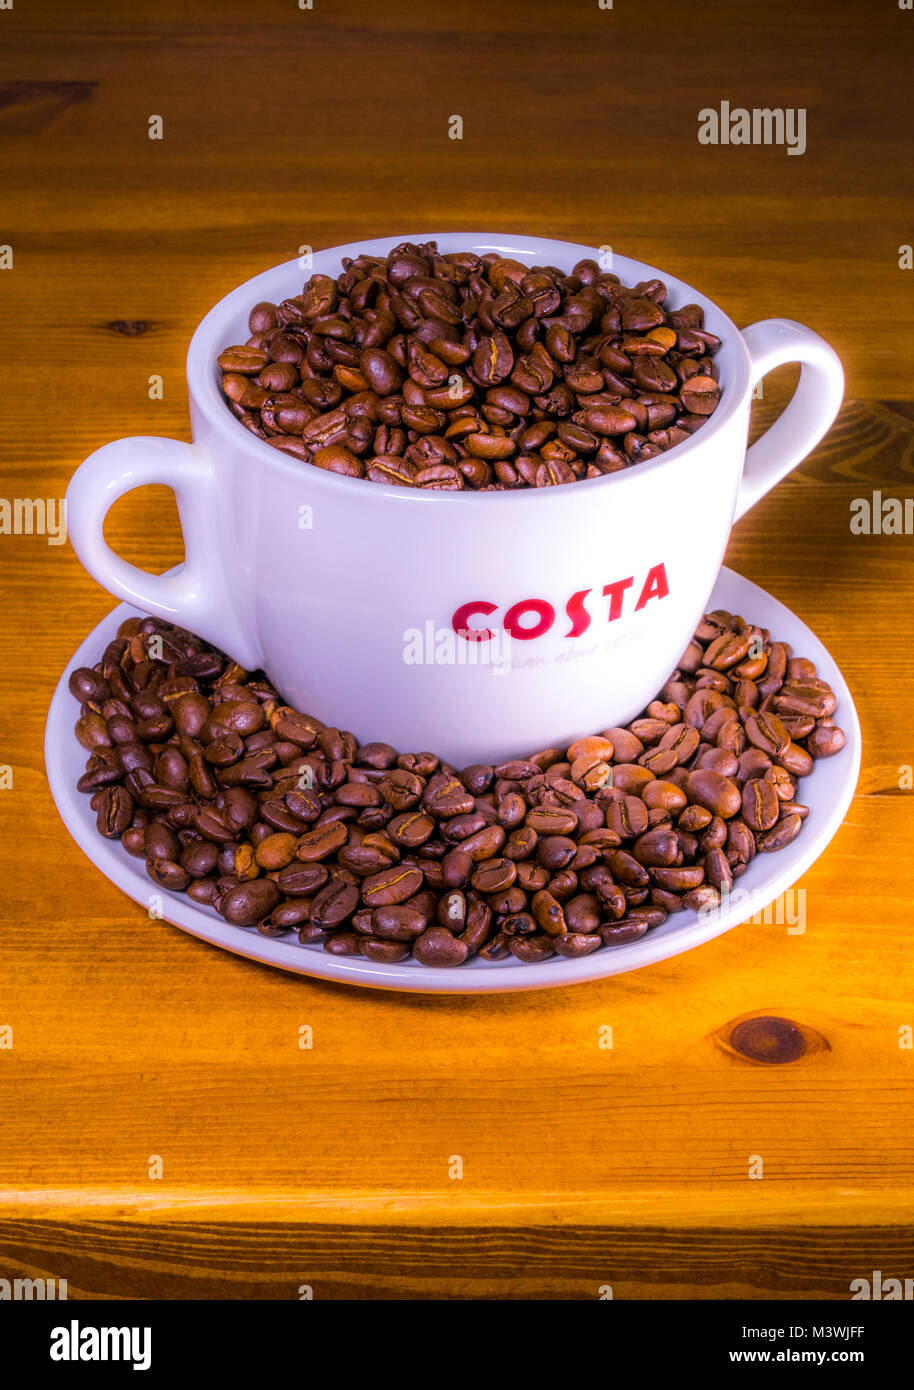 Costa coffee: logo on extra large cup (with dual handles), sitting on saucer, full of roasted whole coffee beans, on an old pine worktop. England, UK. Stock Photo